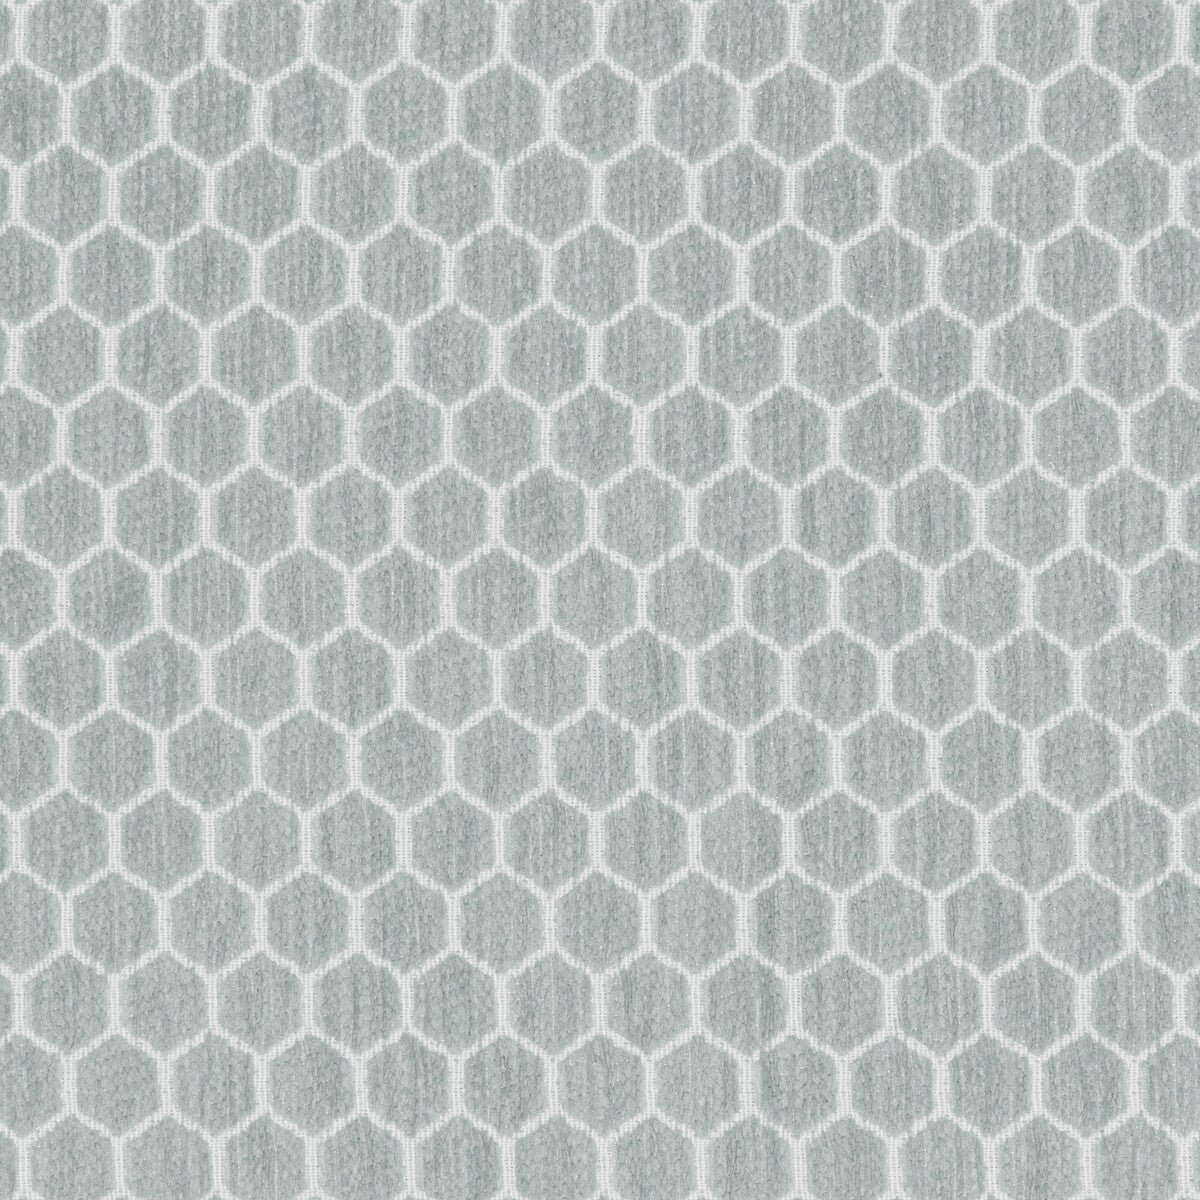 Kravet Design fabric in 36081-11 color - pattern 36081.11.0 - by Kravet Design in the Inside Out Performance Fabrics collection